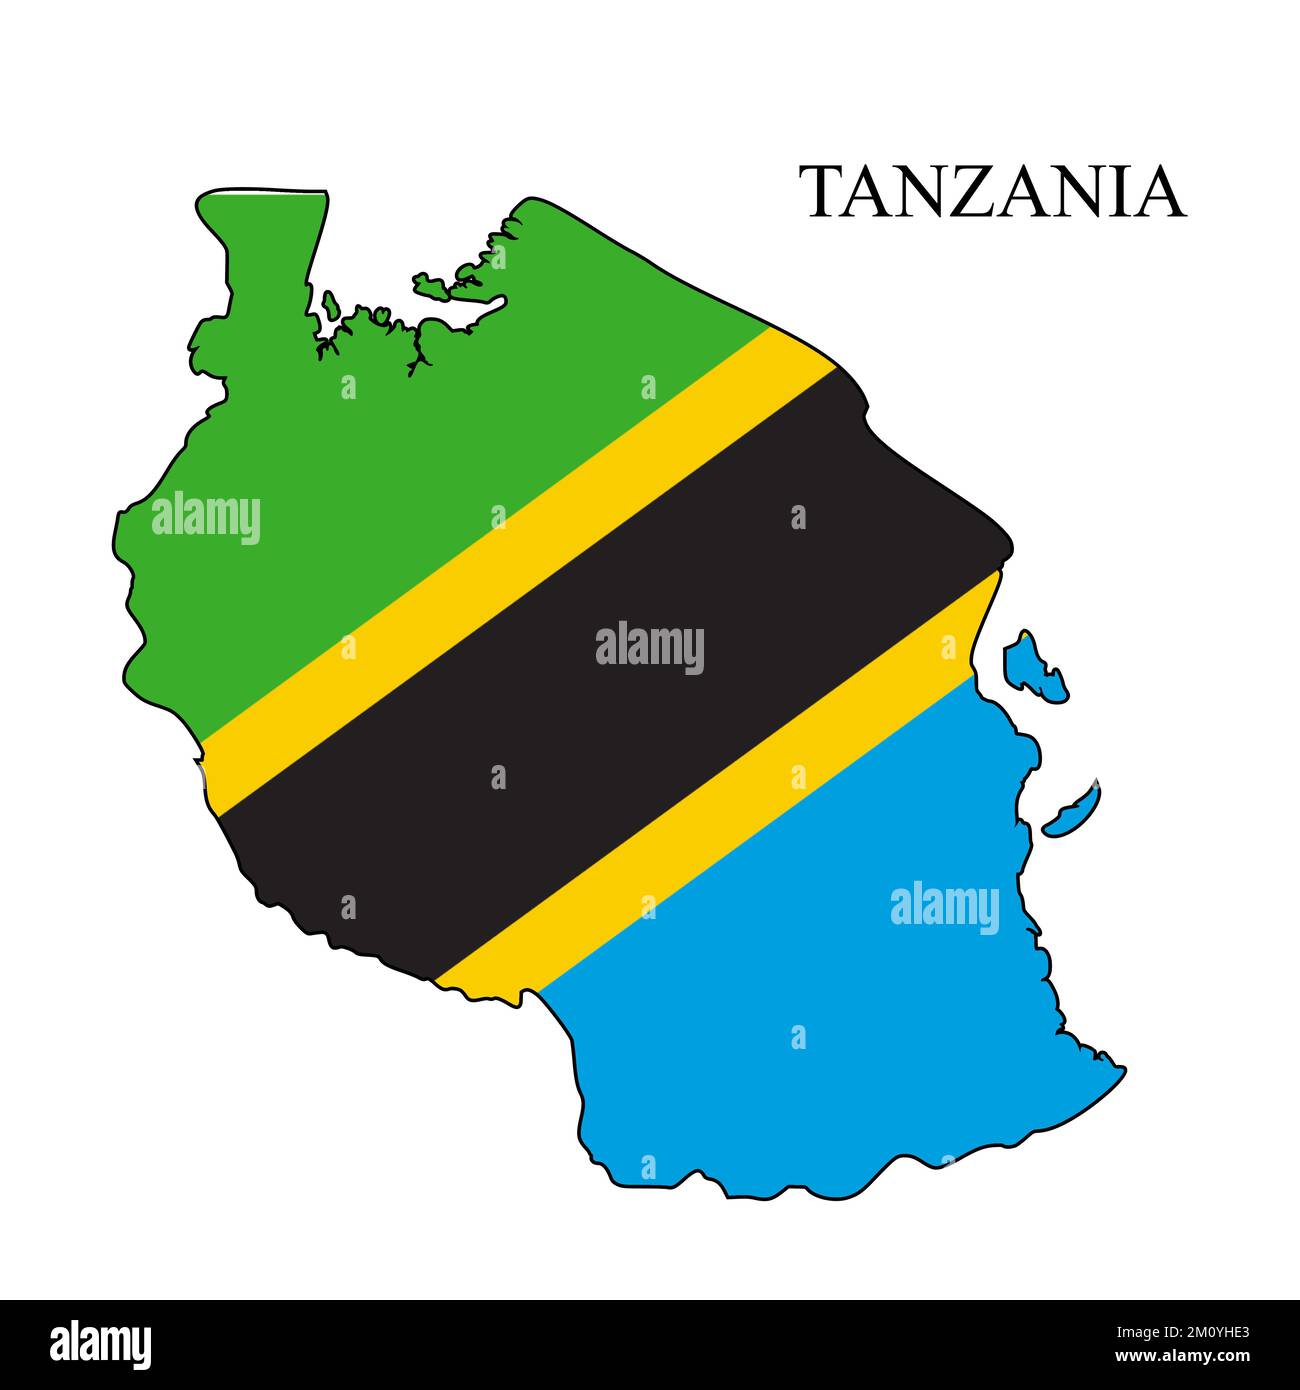 Tanzania map vector illustration. Global economy. Famous country. Eastern Africa. Africa. Stock Vector